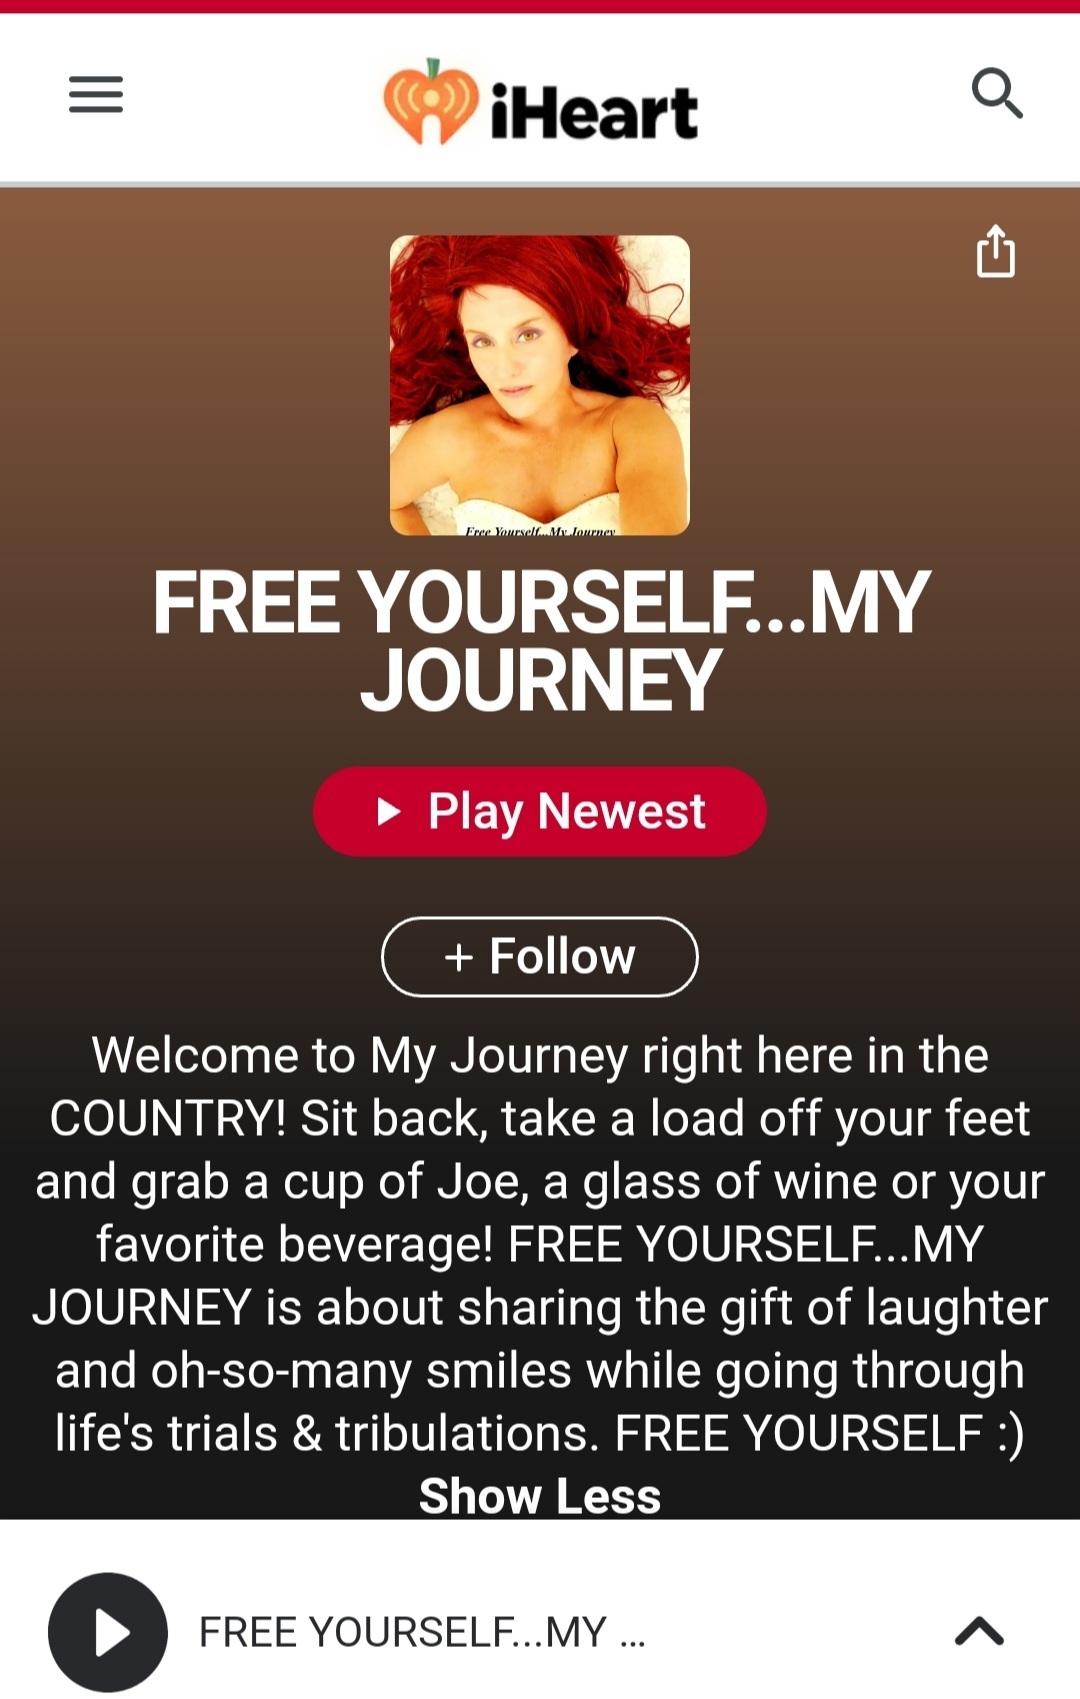 iHeart_Free_YourselfMy_Journey_Promo_1021_64g...